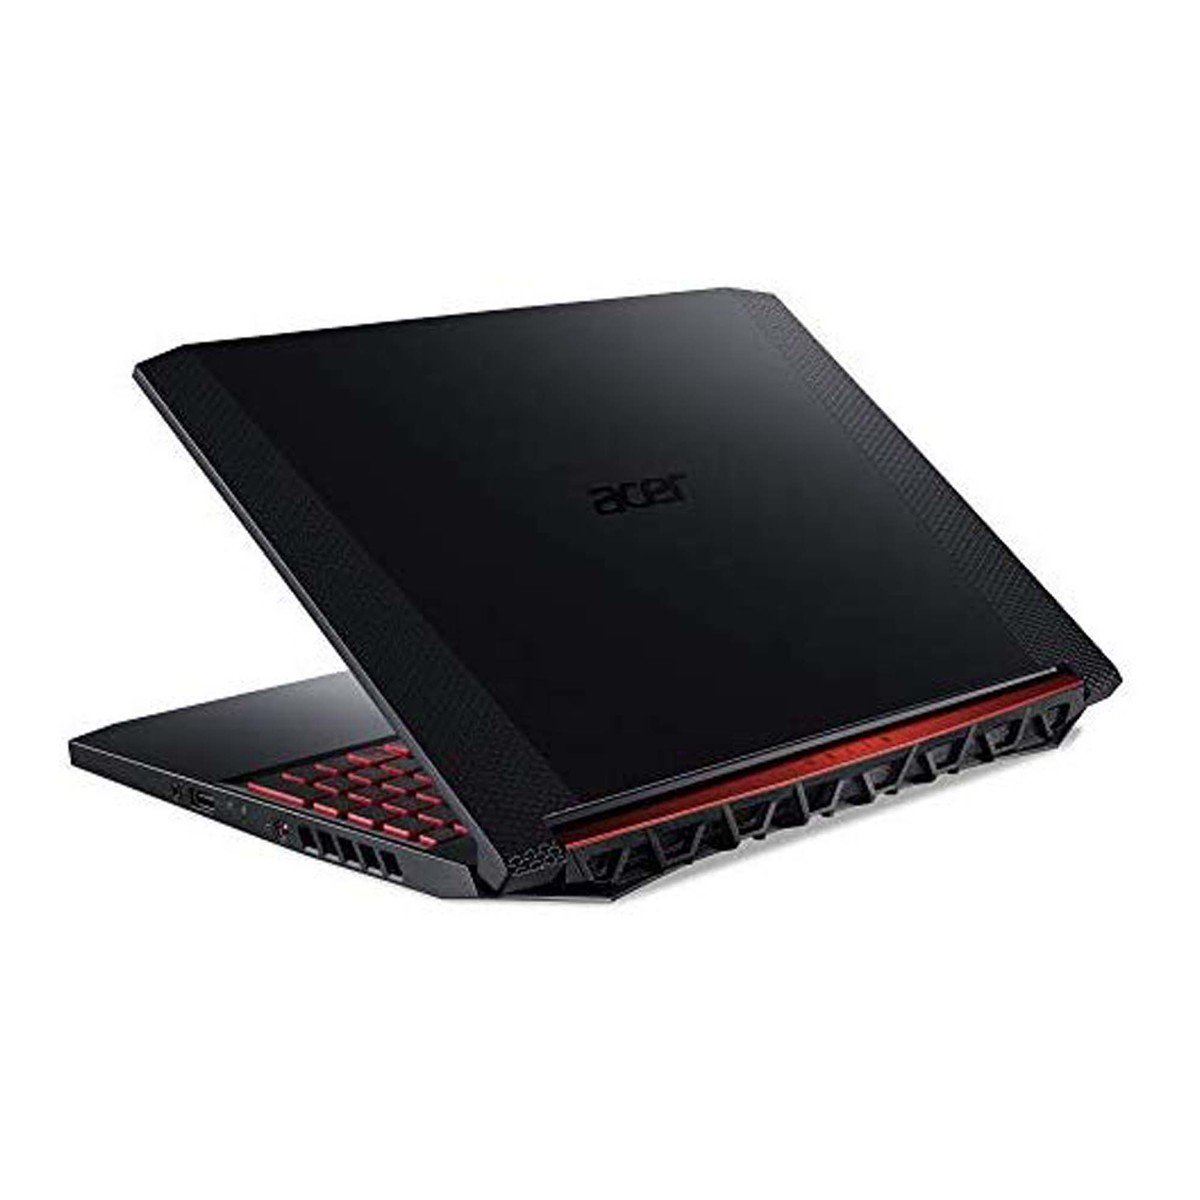 Acer Nitro 5-AN515-54-58BA Gaming Laptop Laptop-Intel Core i5-8300H/8GB DDR4 /1TB SSD/4GB GDDR5-8Gpbs NVIDIA GeForce GTX 1650/15.6" FHD Acer ComfyView IPS LED LCD/Win 10 Home/Black